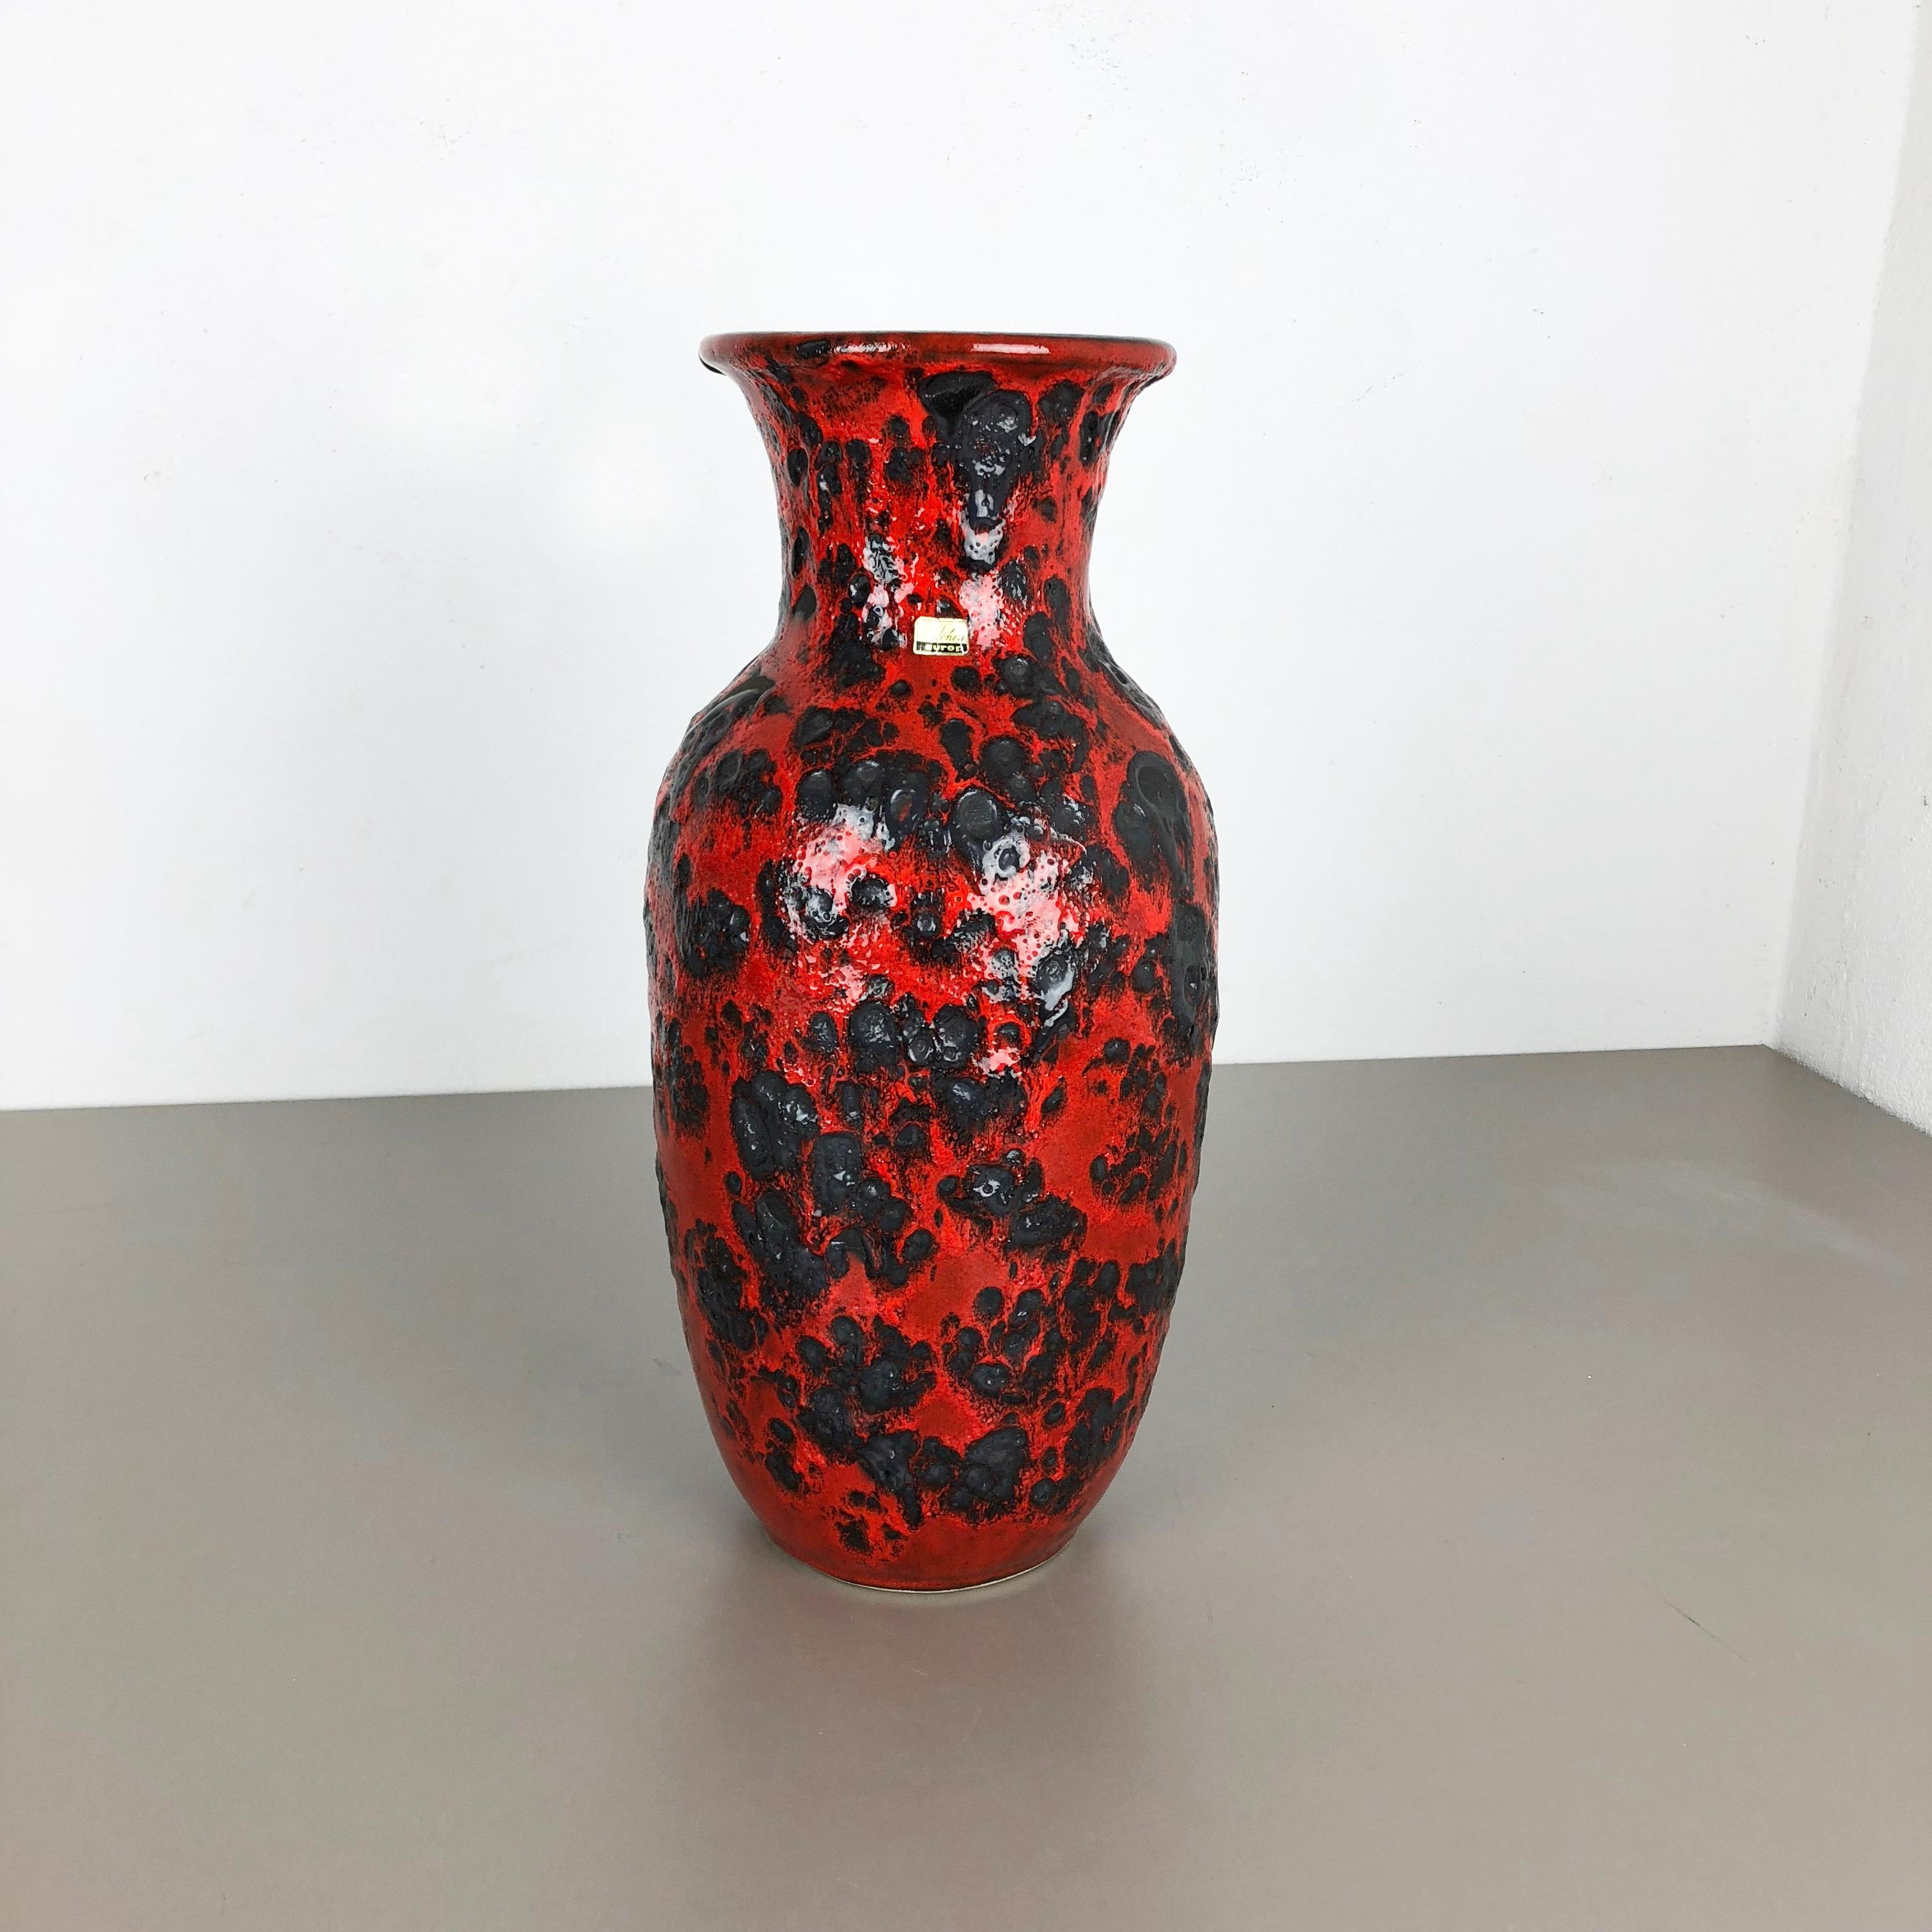 Article:

Fat lava art vase extra large version


Model: 239-41


Producer:

Scheurich, Germany



Decade:

1970s




This original vintage vase was produced in the 1970s in Germany. It is made of ceramic pottery in fat lava